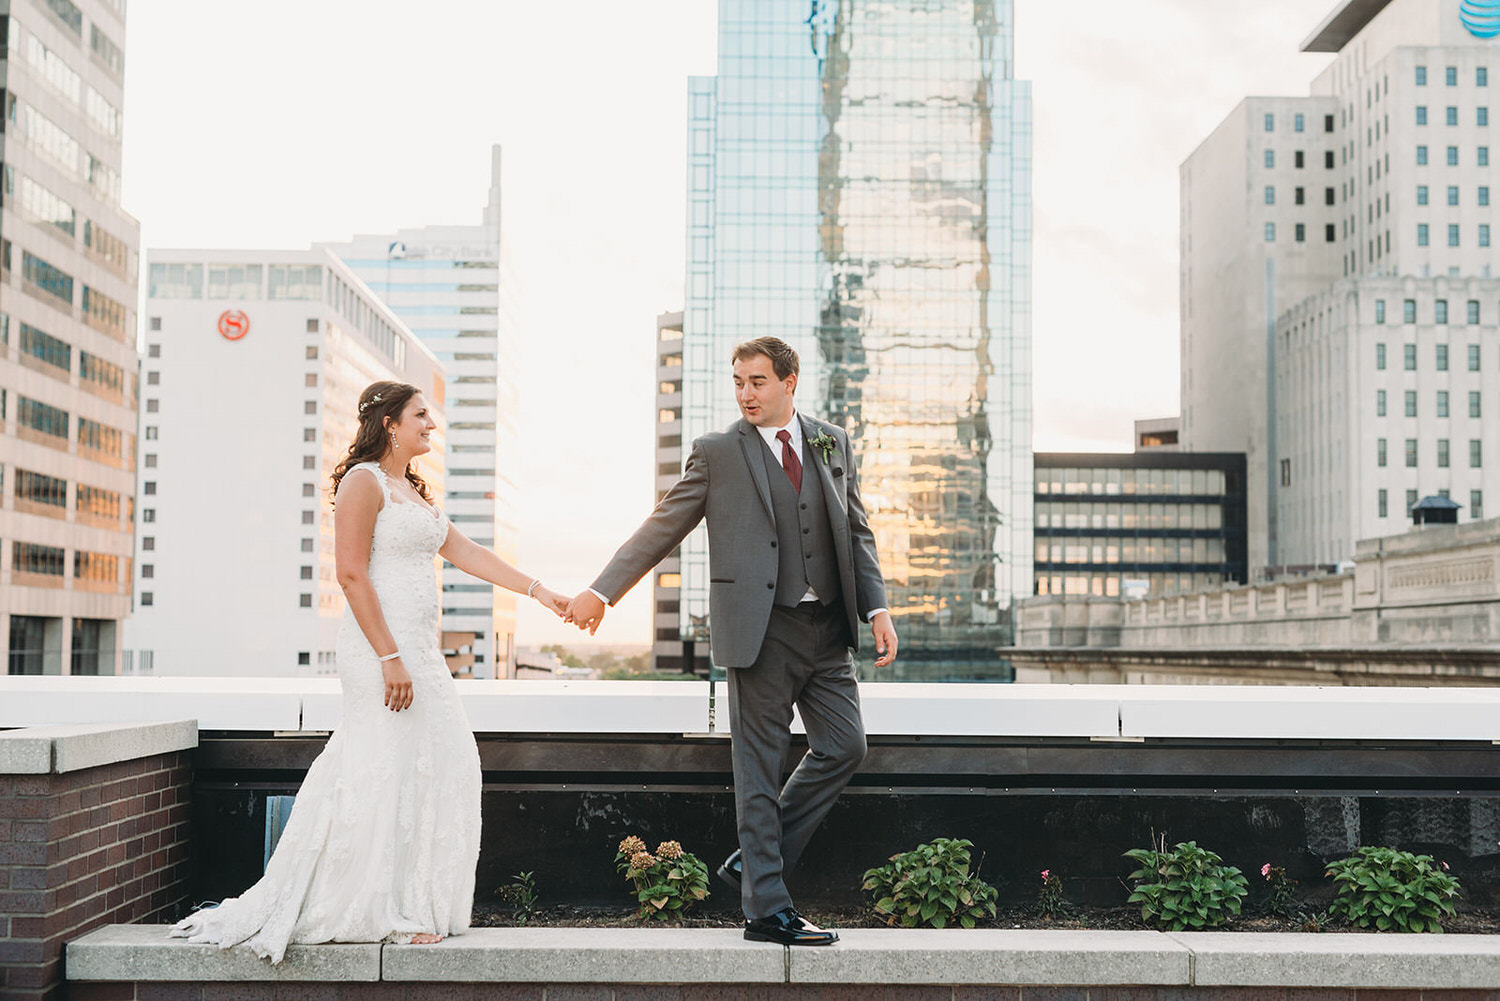 man and woman in wedding attire hold hands and walk along edge of building during their regions tower wedding celebration